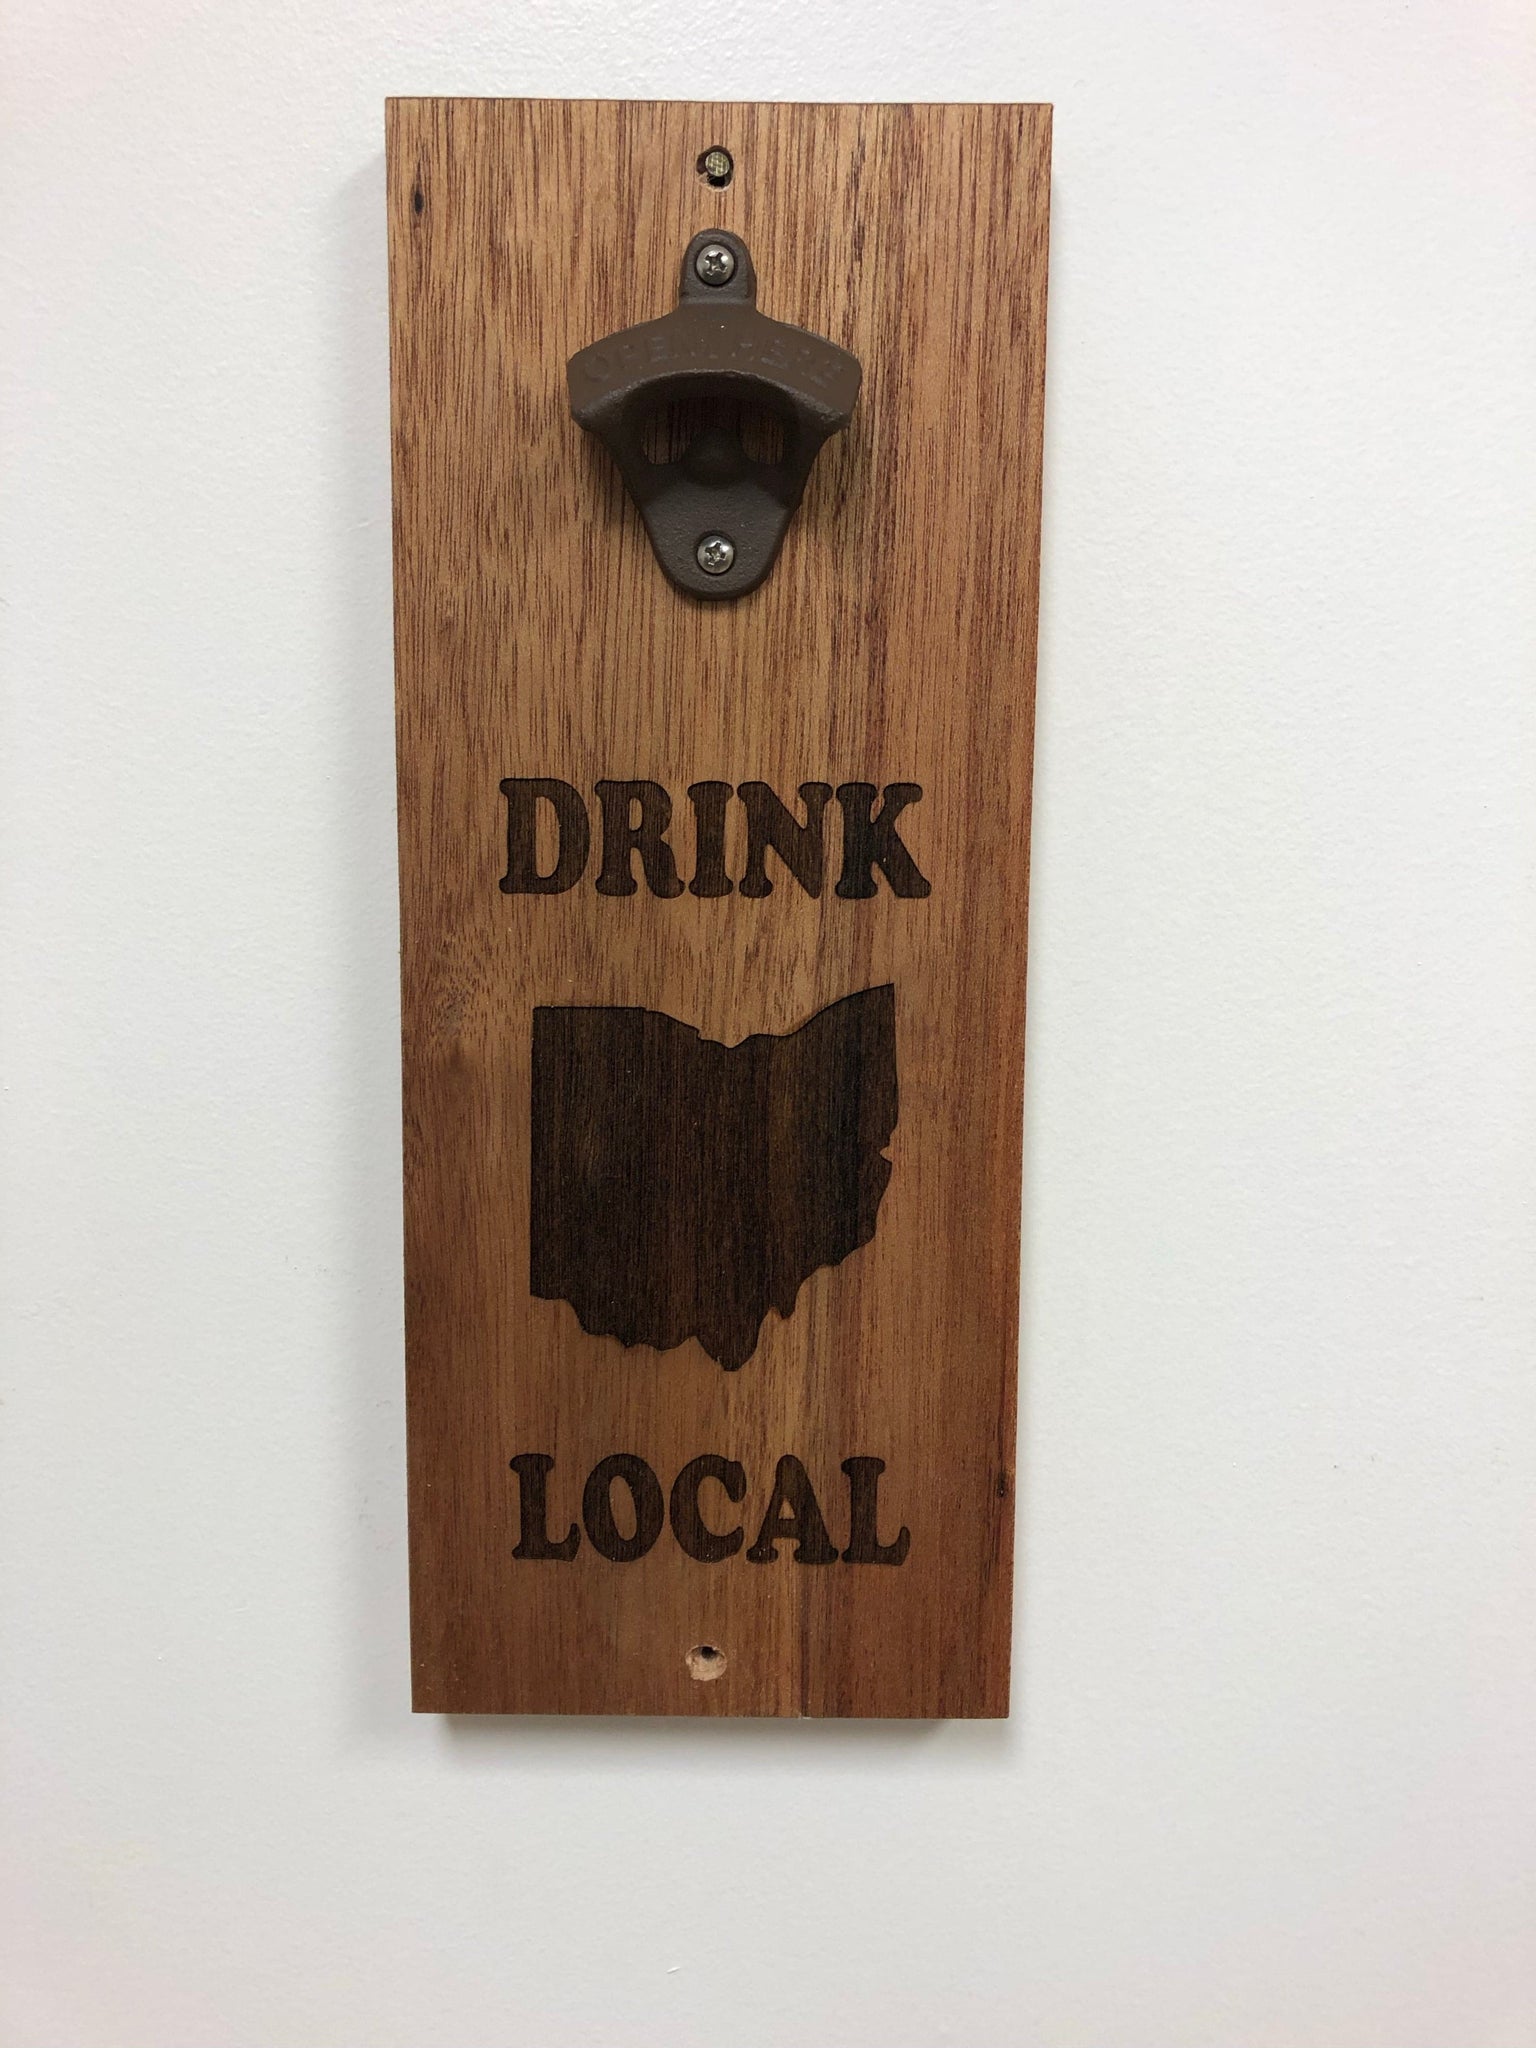 Wall Mount Bottle Opener. Drink Local Bottle Opener. Ohio Wall Mount Wooden Bottle Opener. - C & A Engraving and Gifts